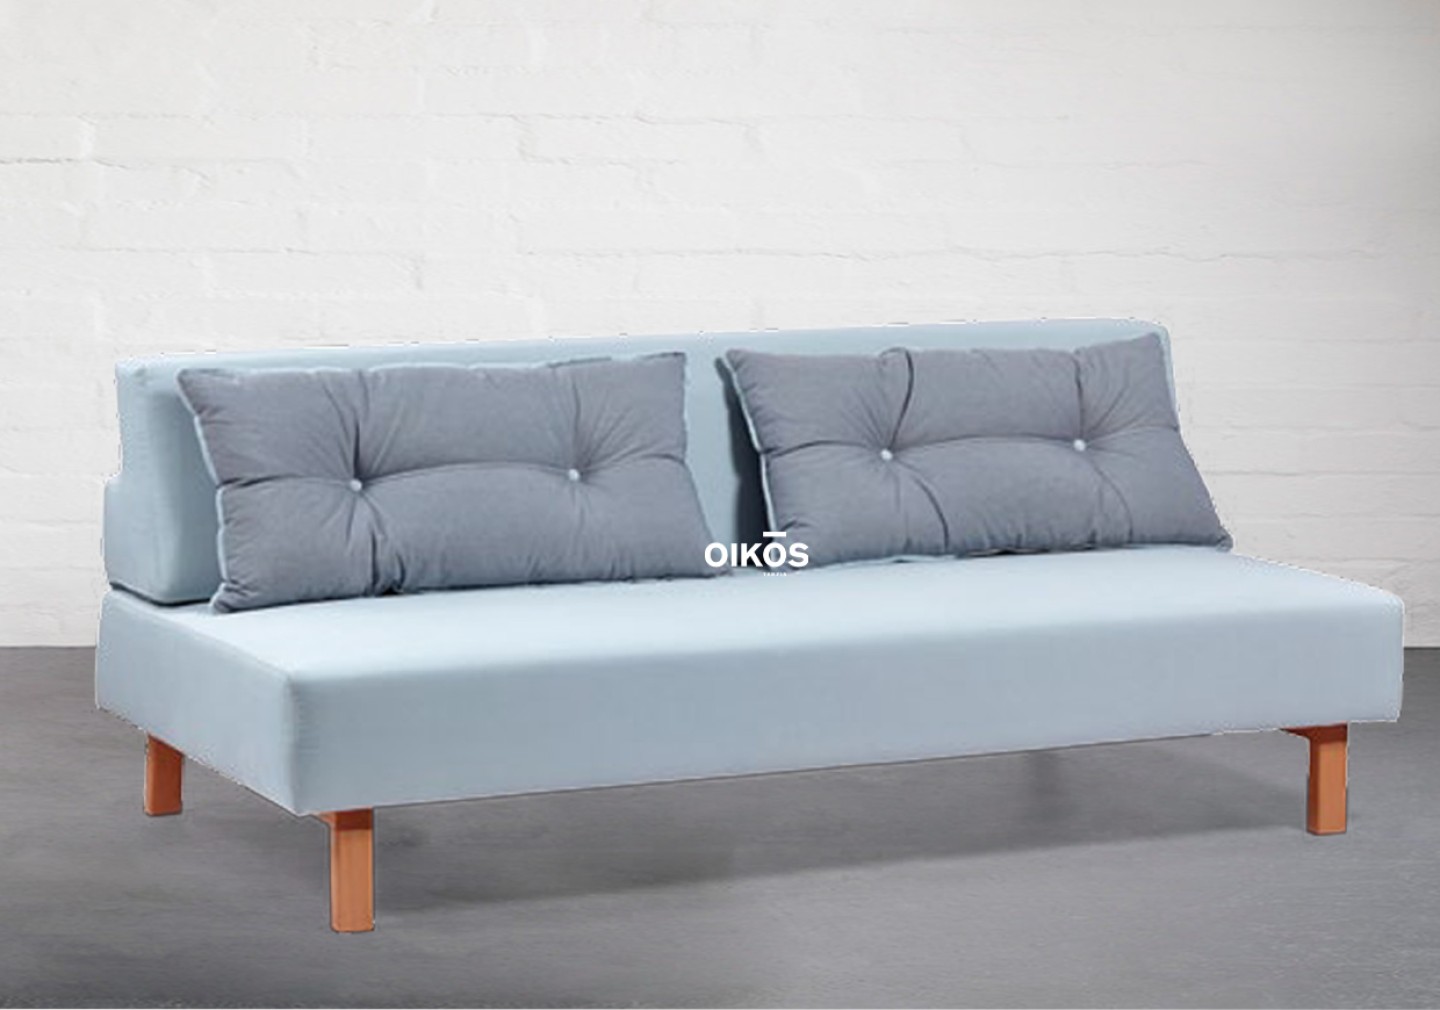 THE CLOUD PROFESSIONAL SOFA BED